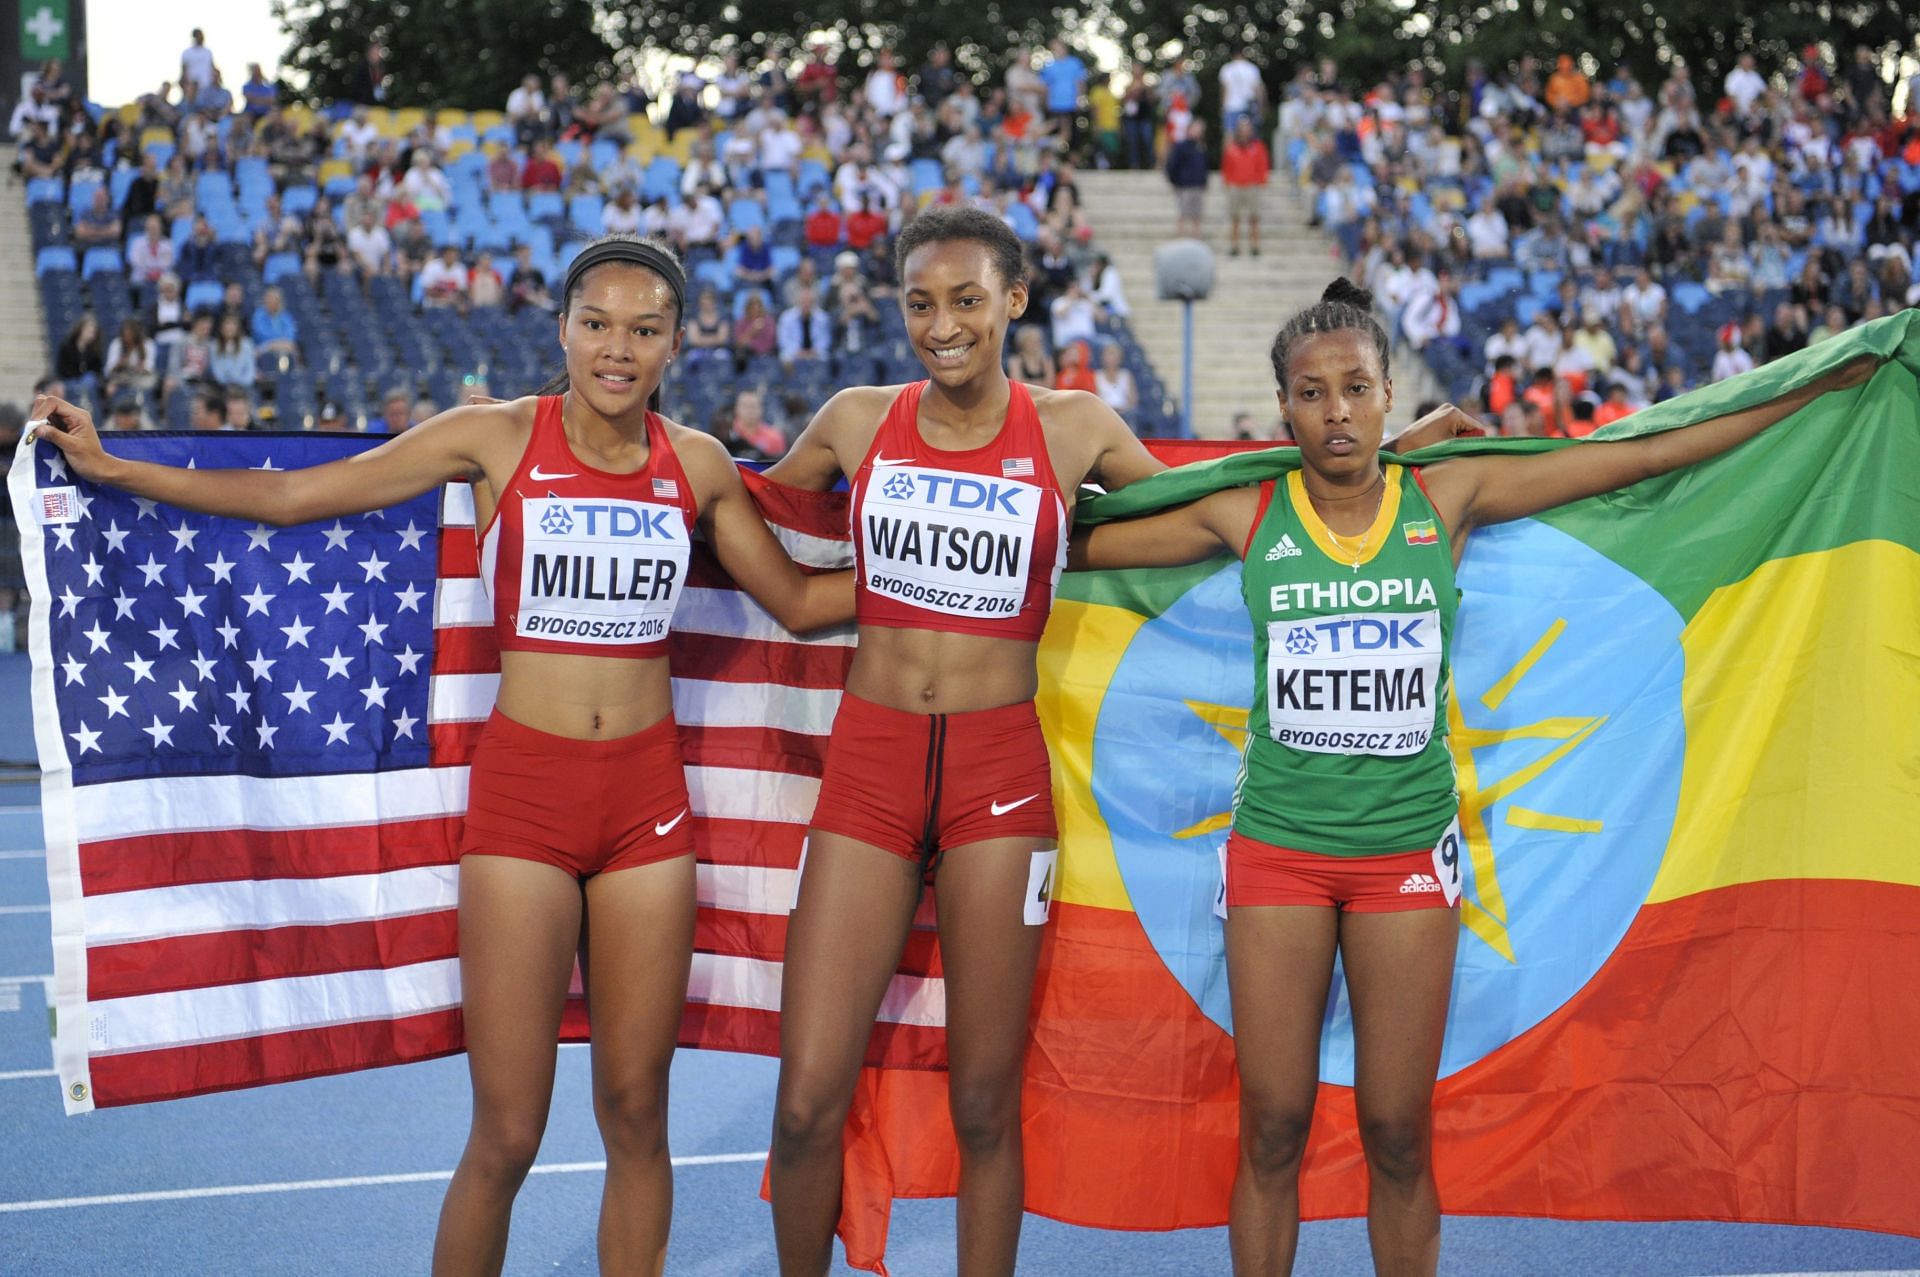 Aaliyah Miller (left), Samantha Watson (center) and Tigist Ketema (right) celebrate after the women&#039;s 800 metres during the IAAF World U20 Championships on July 21, 2016 in Bydgoszcz, Poland. (Photo by Adam Nurkiewicz/Getty Images)